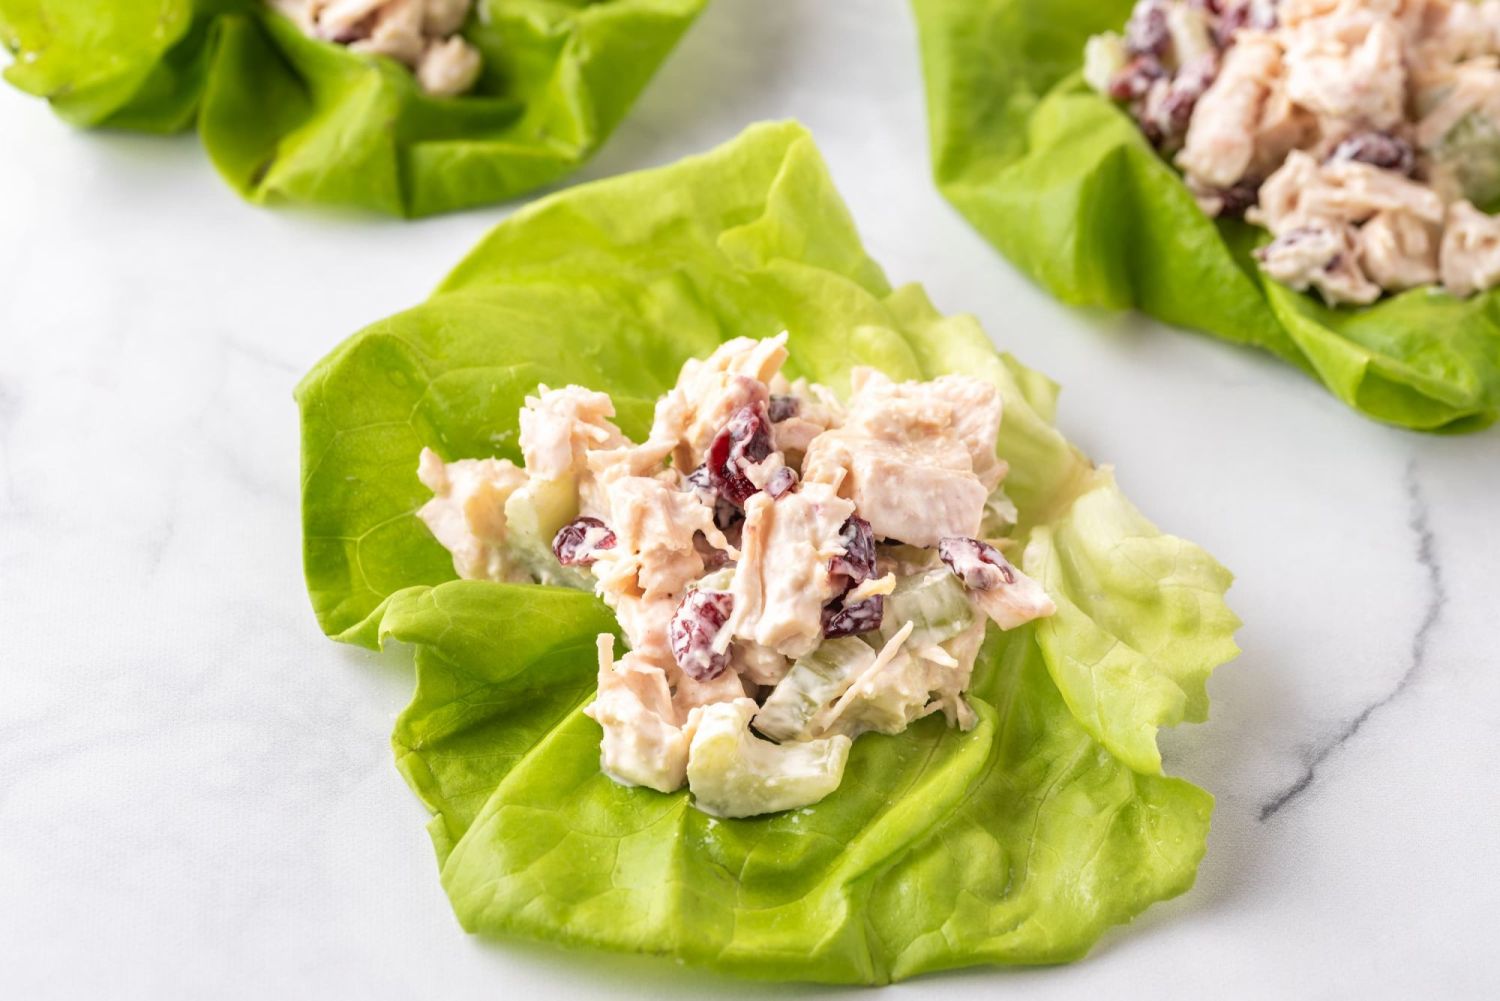 Lettuce wraps filled with chicken salad made with cooked chicken breast, celery, dried cranberries, and Greek yogurt.